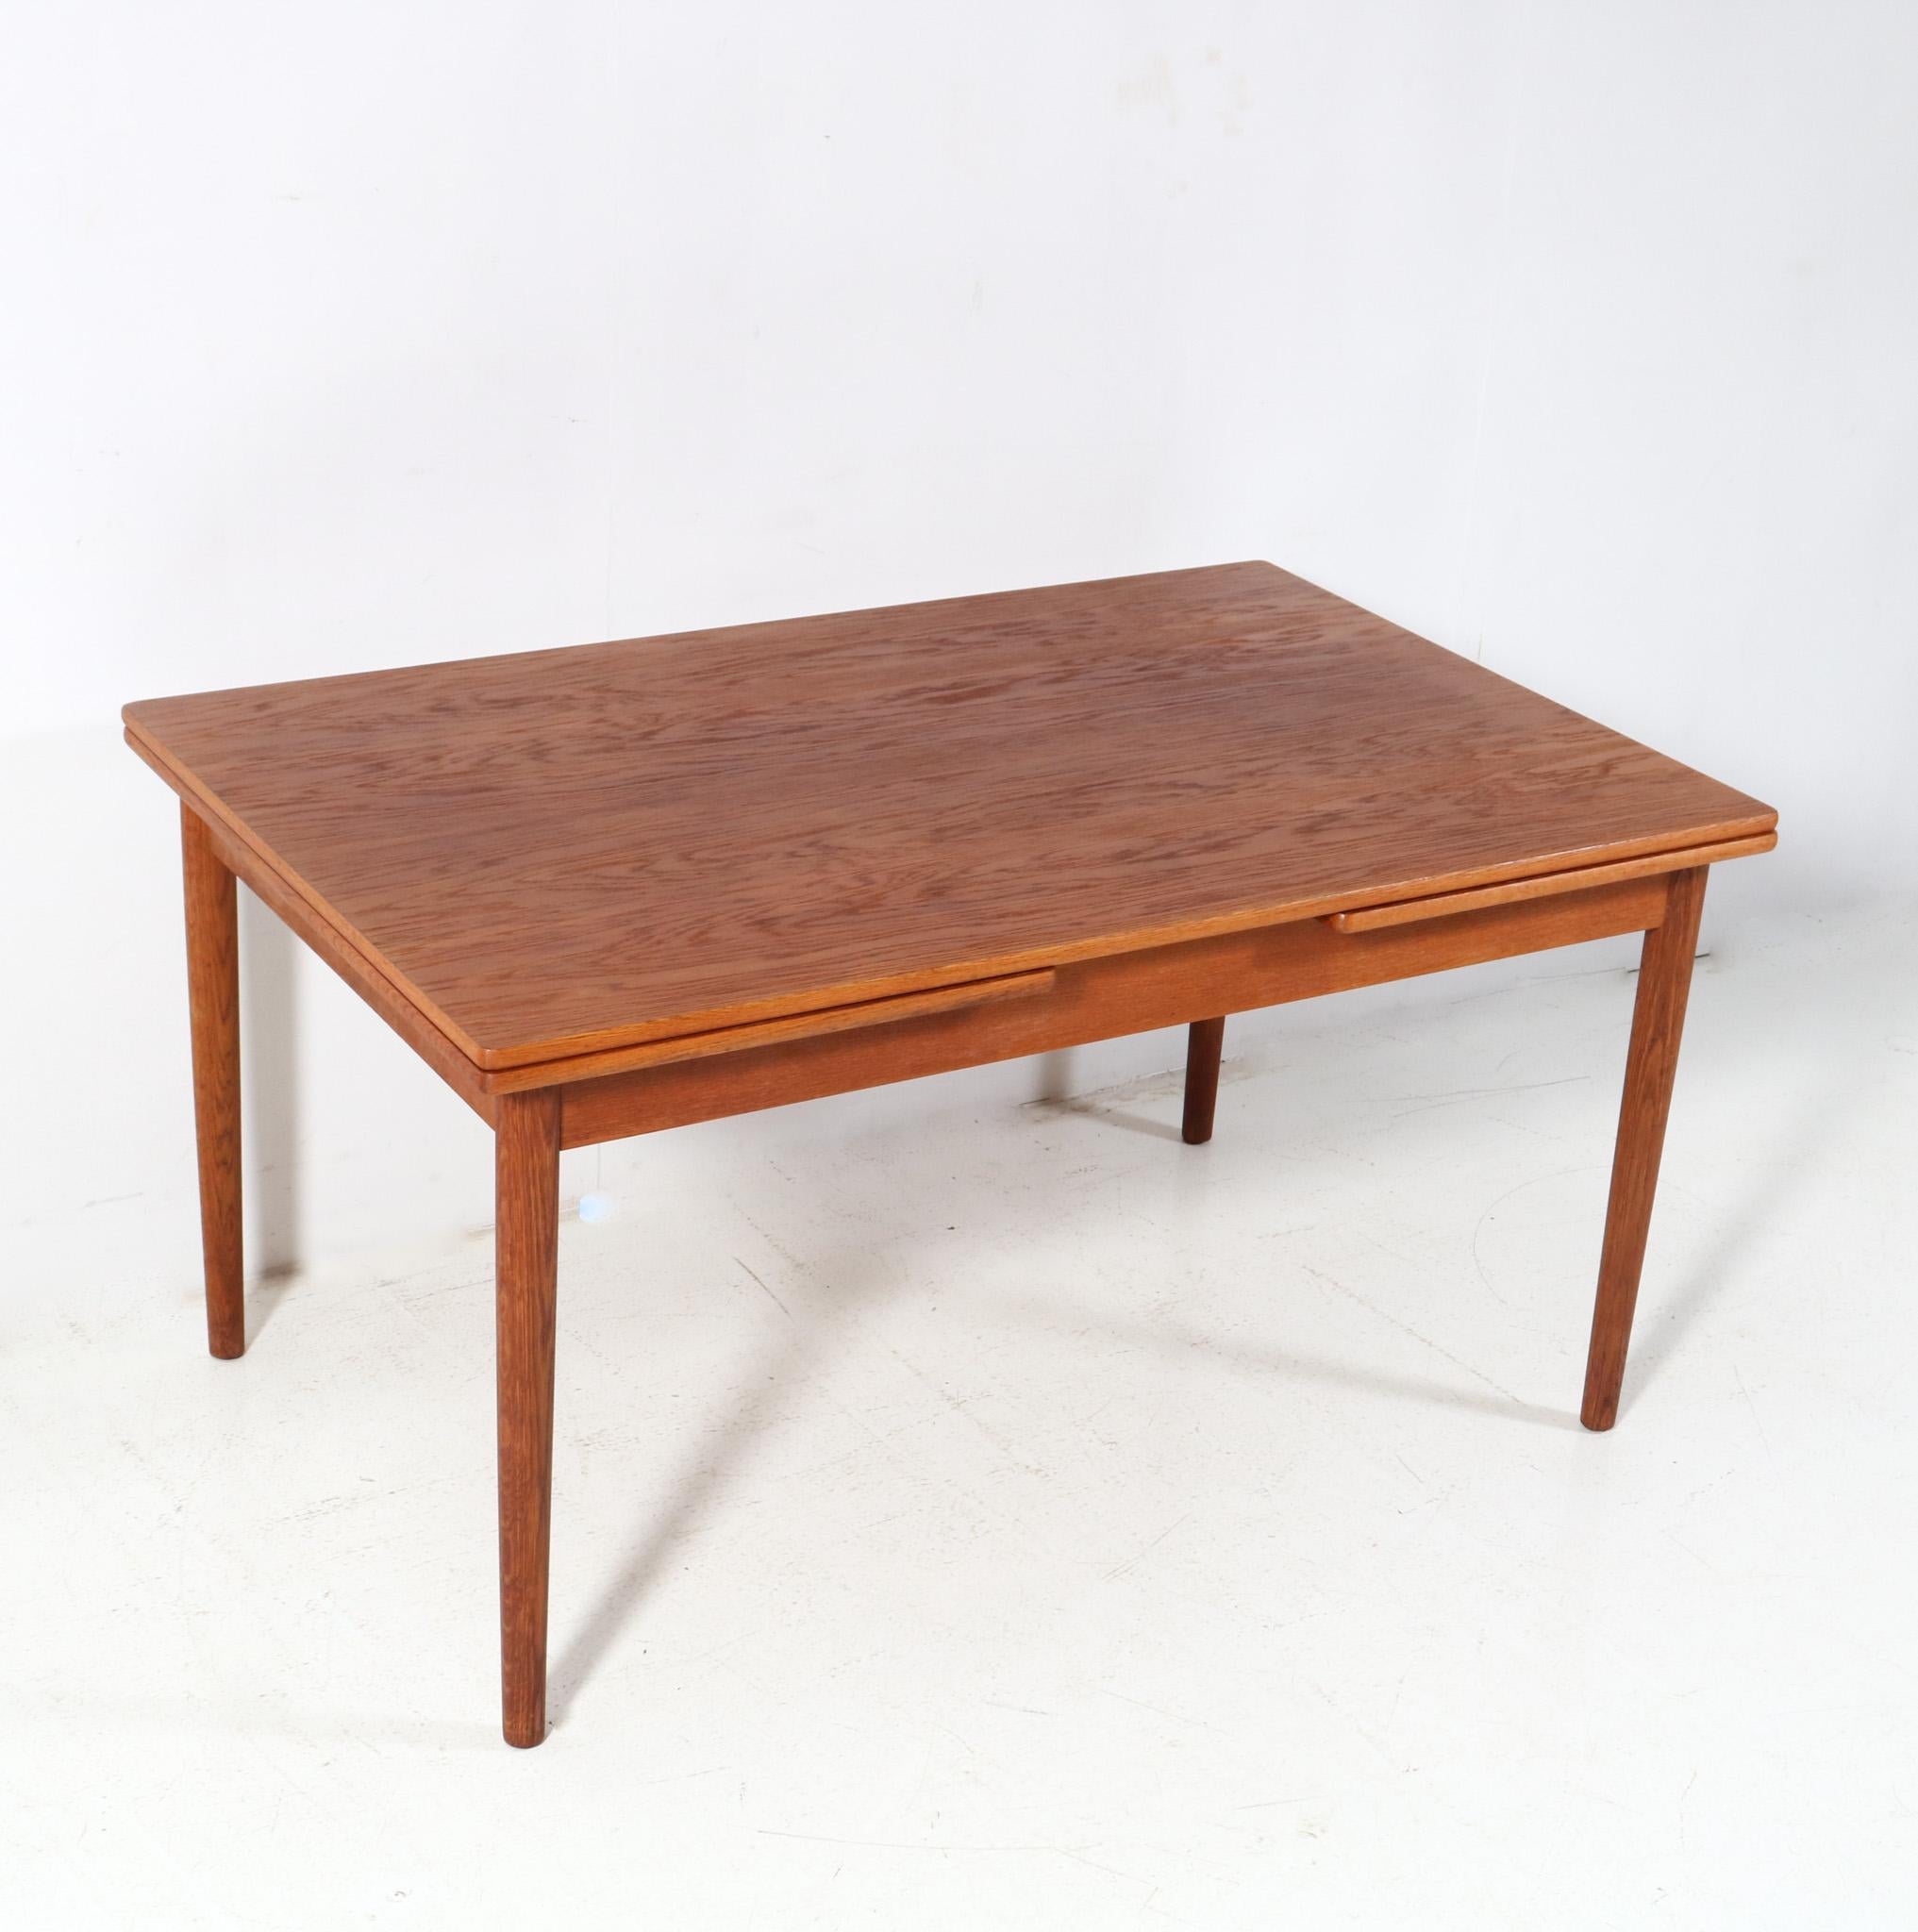  Mid-Century Modern Oak AT-316 Dining Table by Hans J. Wegner for Andreas Tuck In Good Condition For Sale In Amsterdam, NL